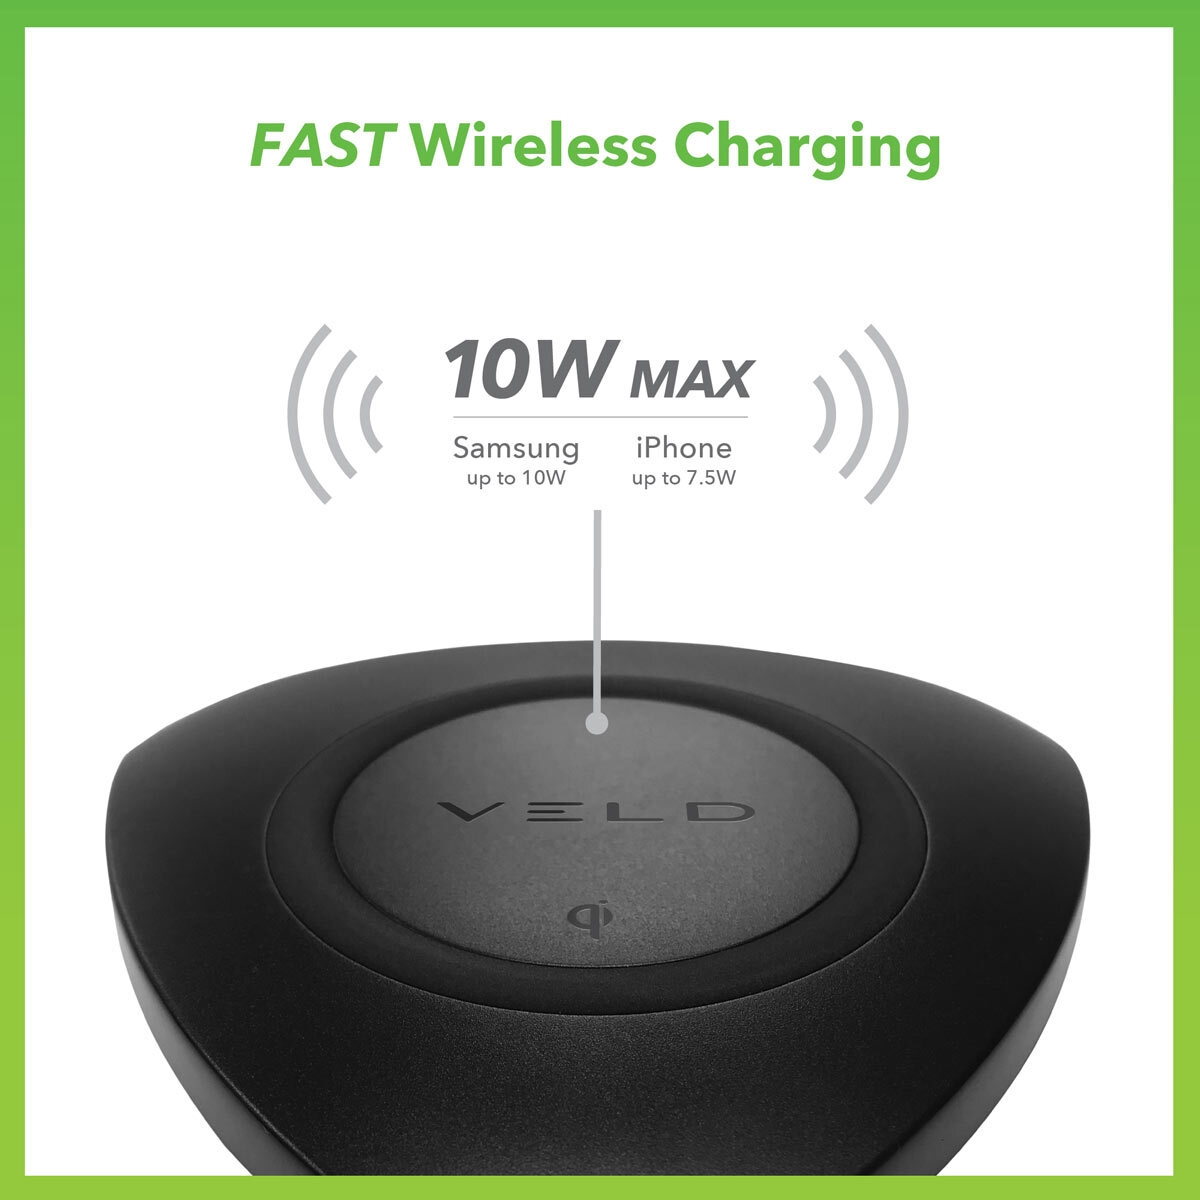 Buy Veld Wireless Charging Pad with Super Fast USB Wall Charger at Costco.co.uk